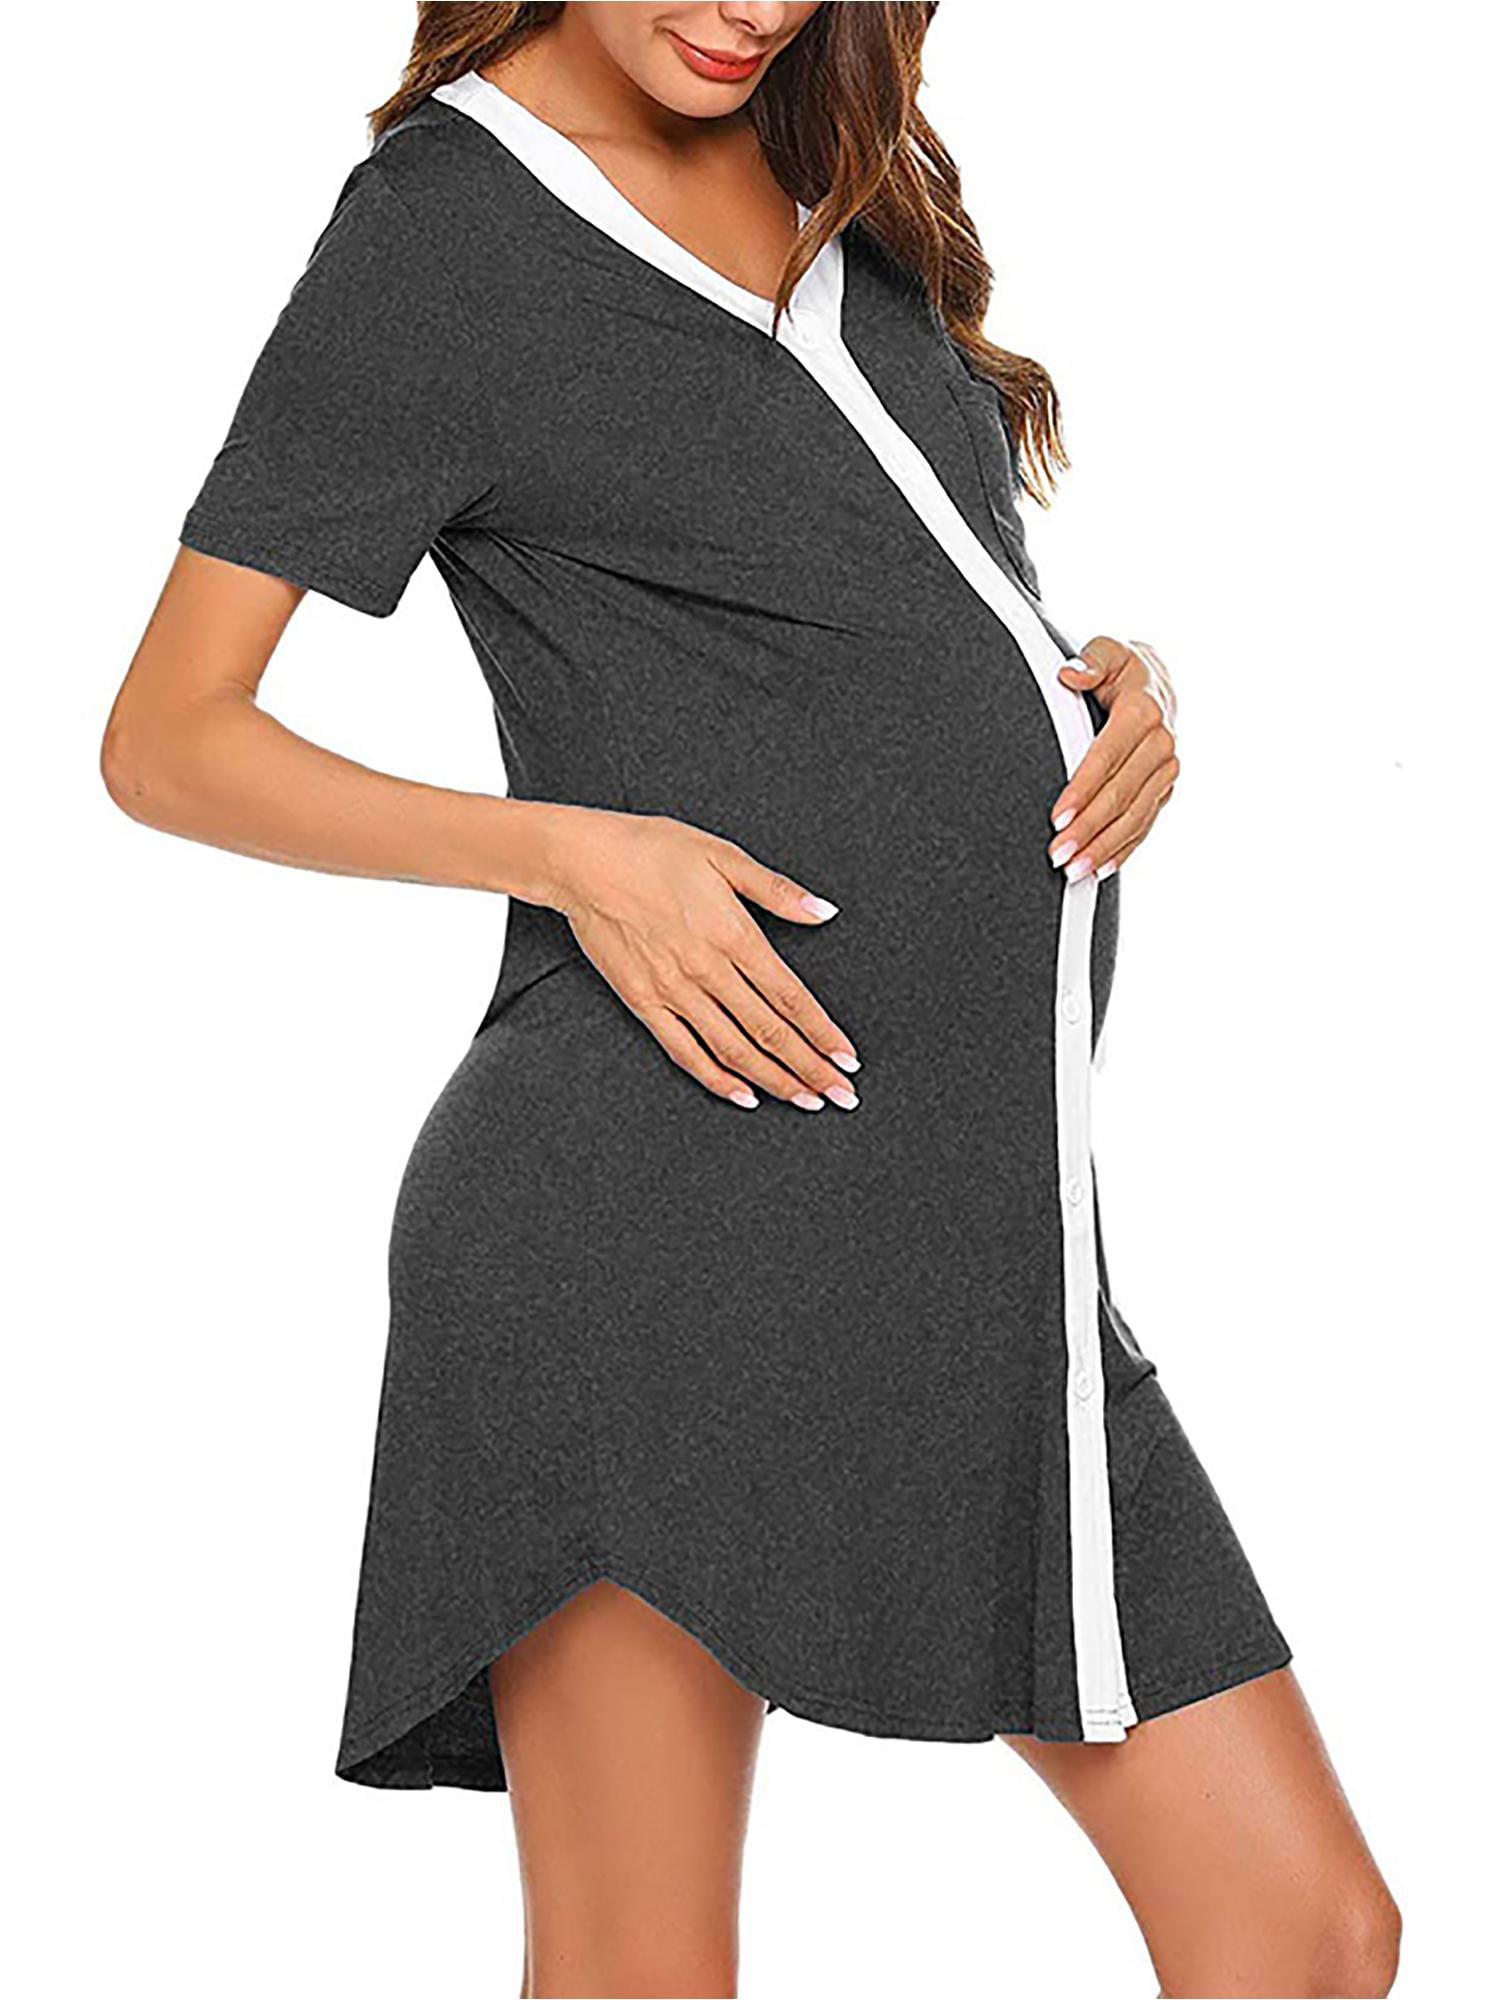 Ekouaer Womens Maternity Nightgowns Button Front Cotton Nursing Sleepdress Short Sleeve Labor And Delivery Gown S-XXL 